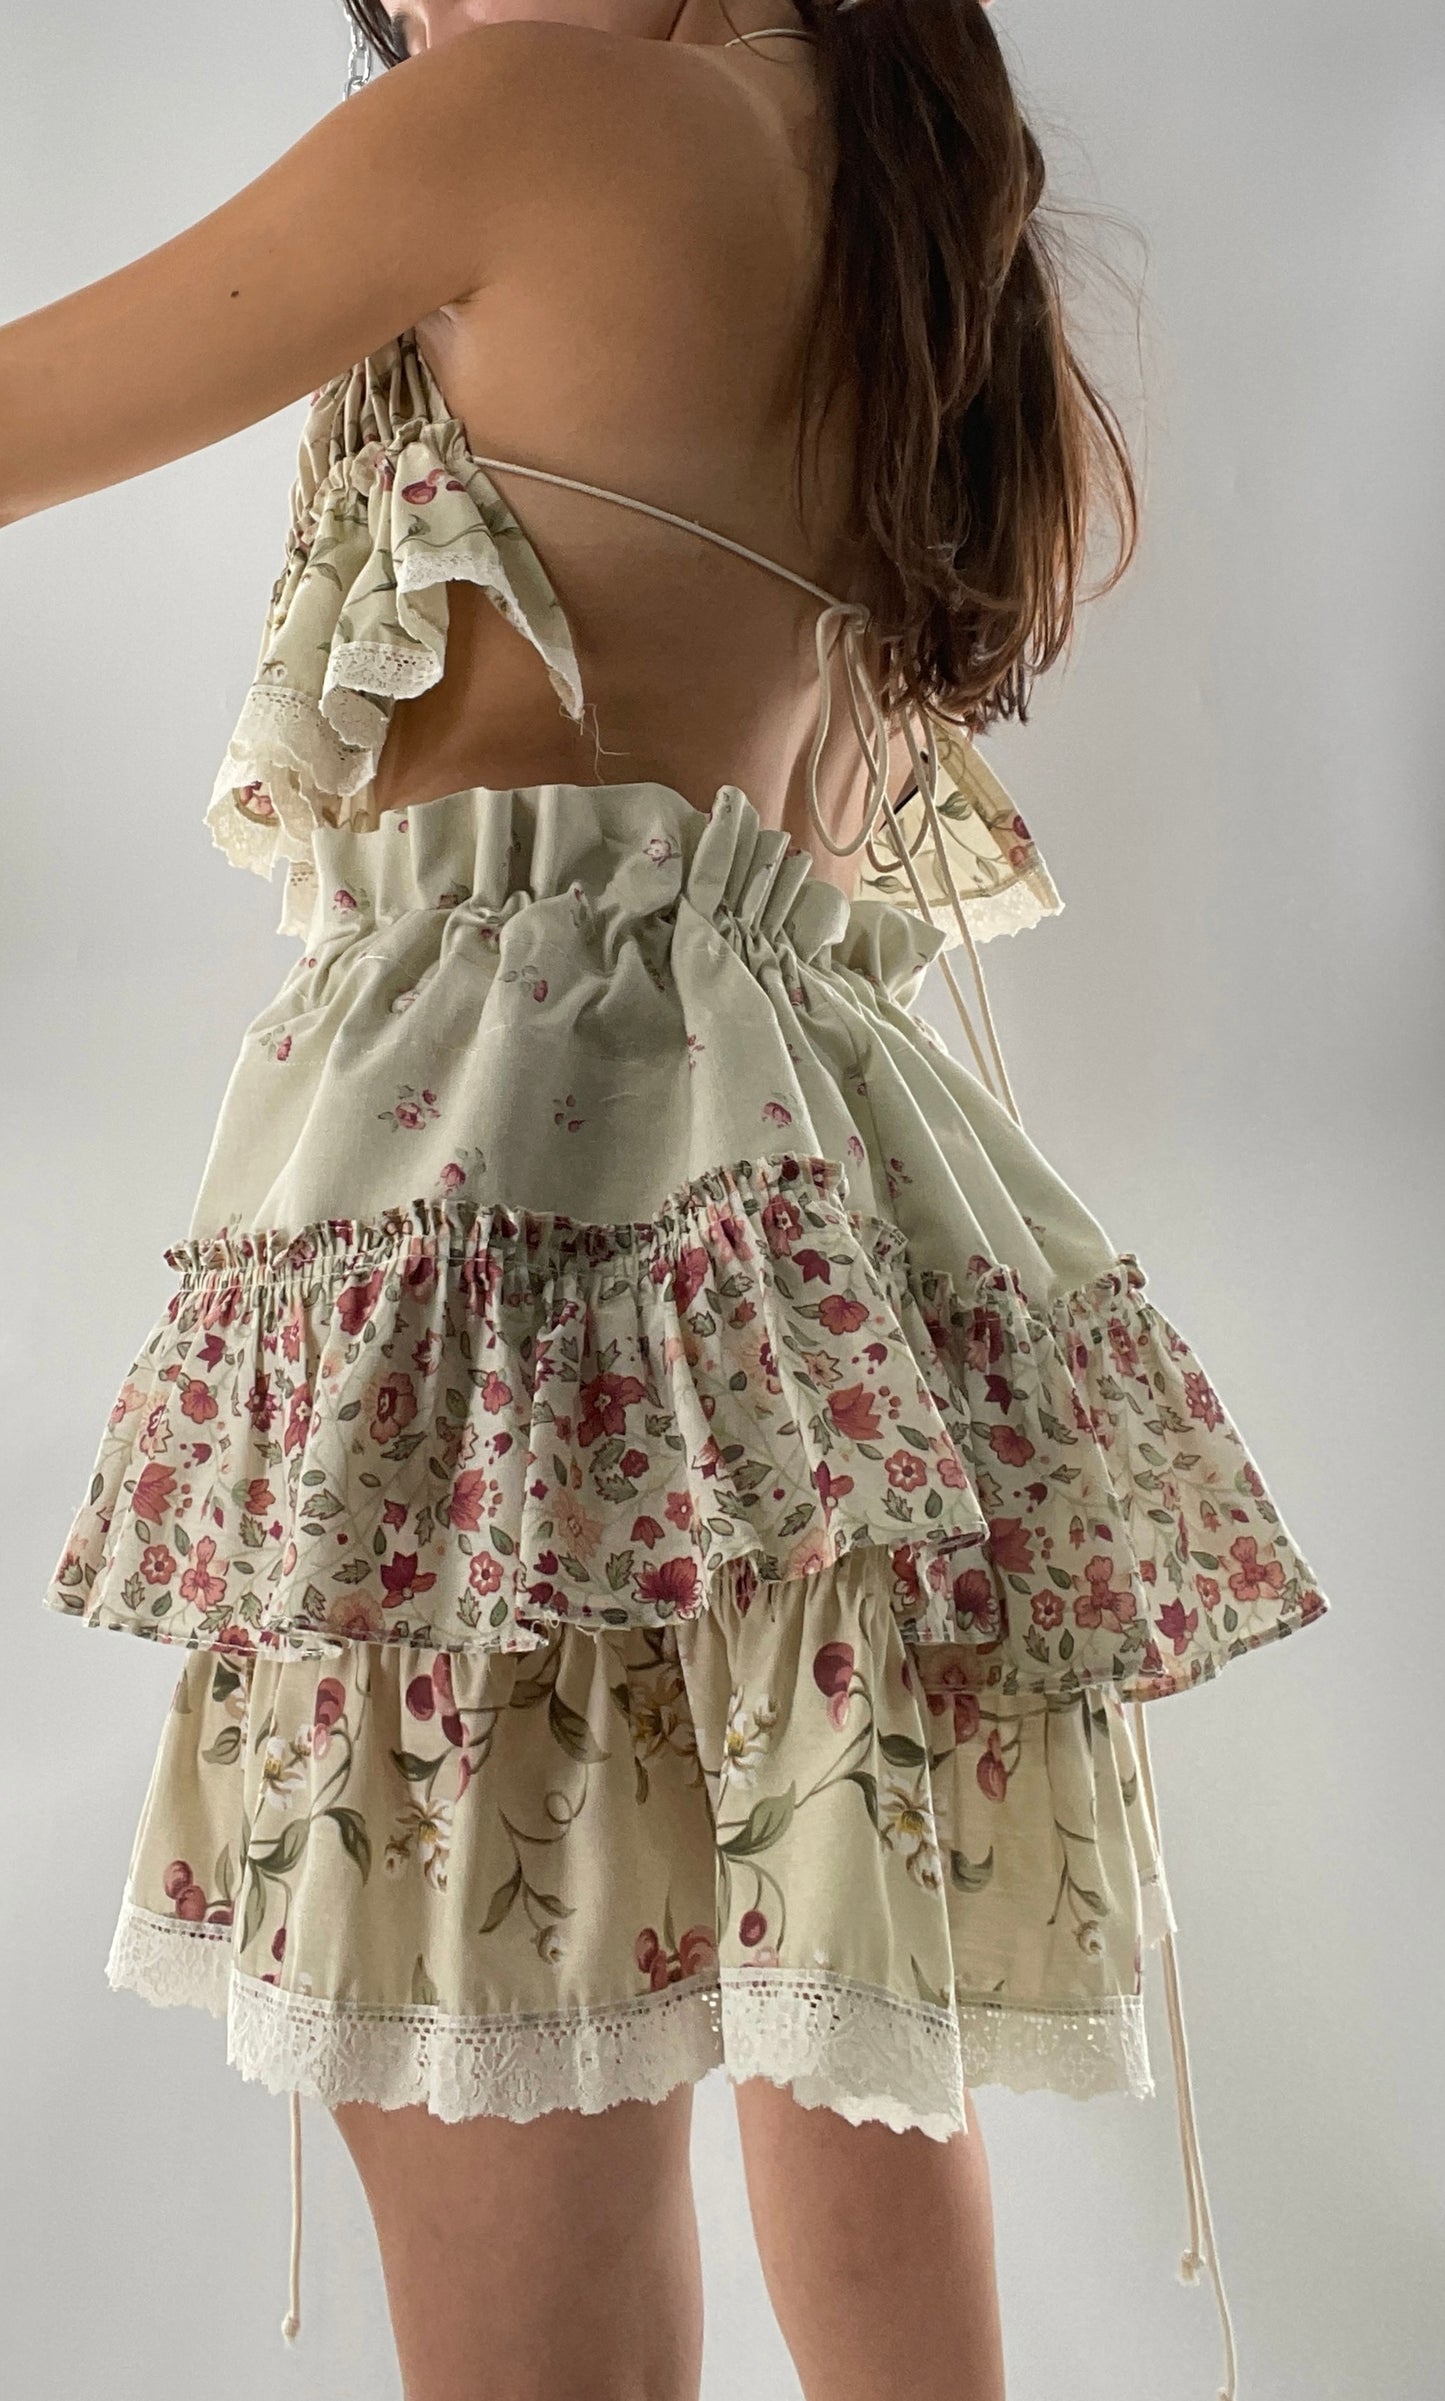 Vintage Cherry Cottage Set with Tiered Ruffled Skirt and Ruched, Backless Top (One Size)